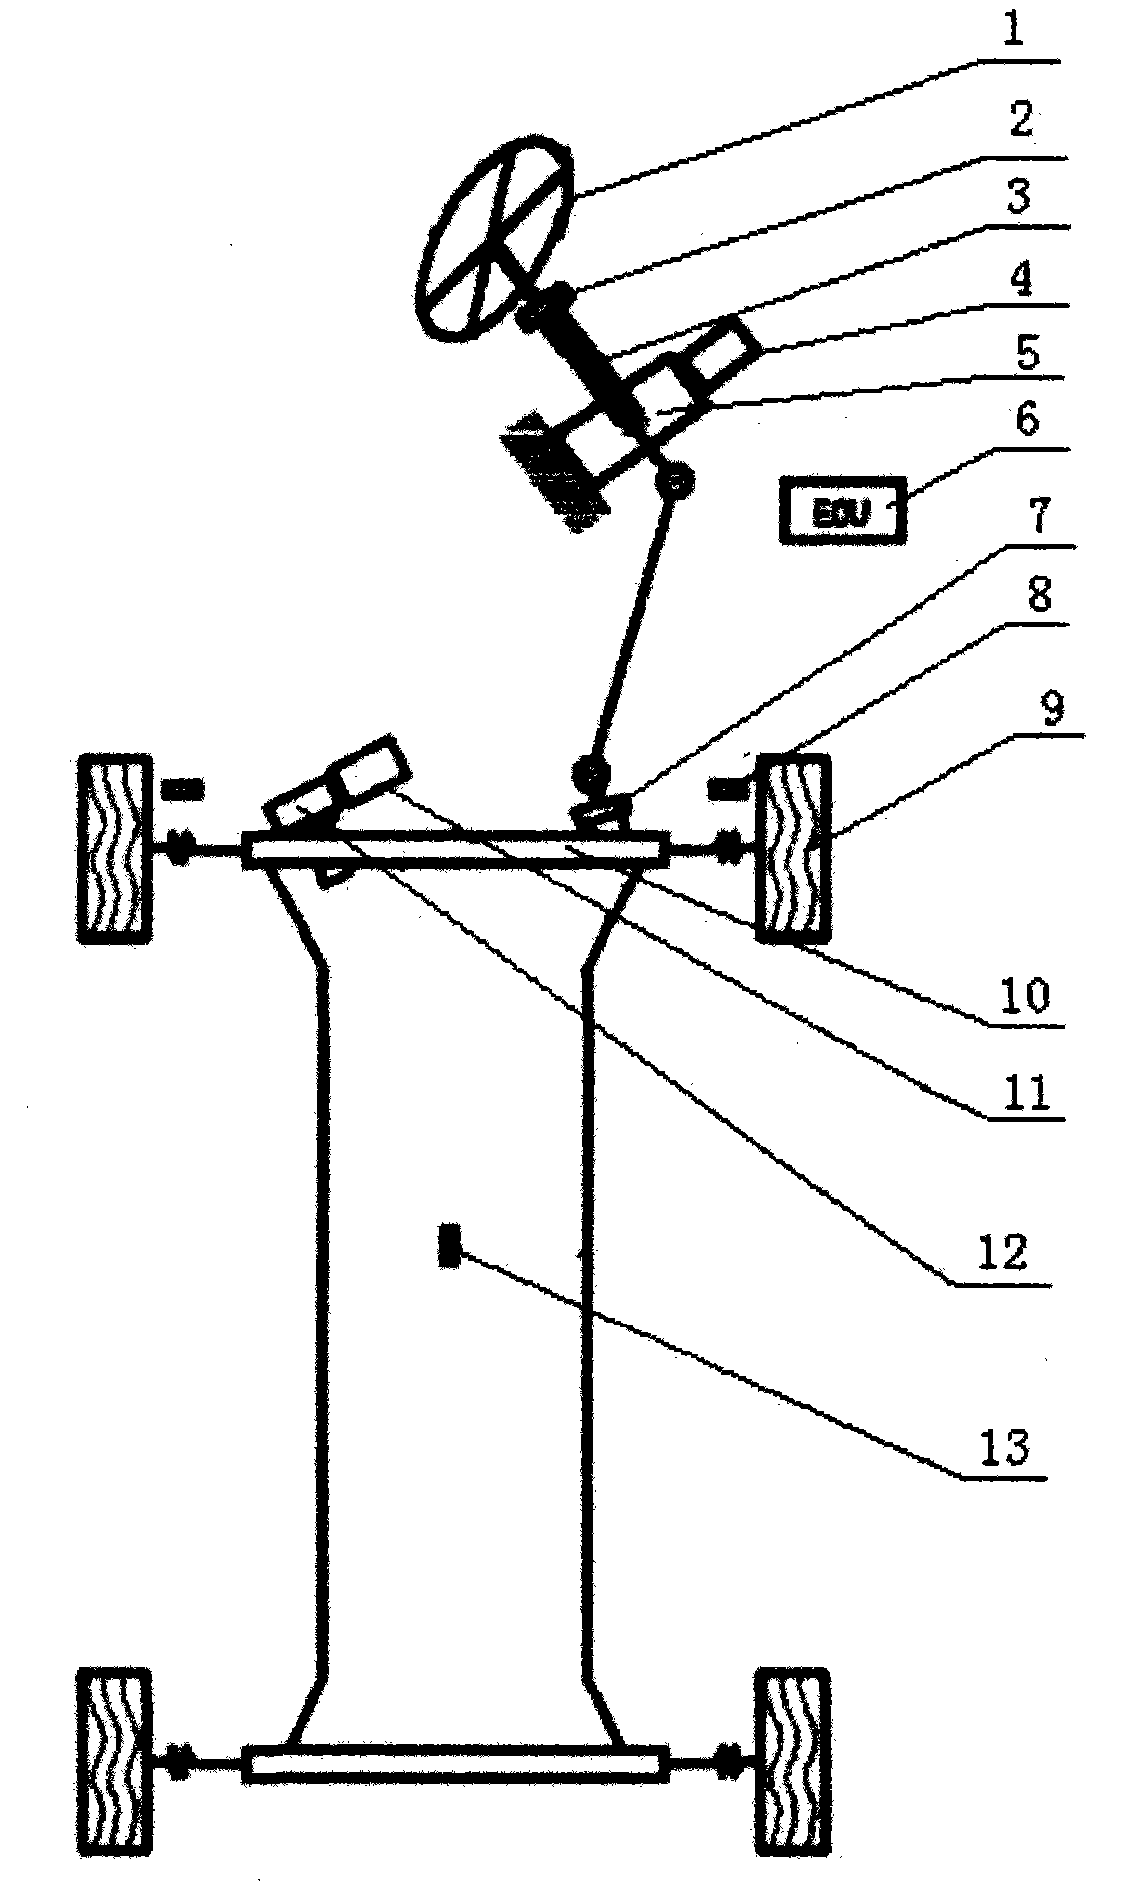 Active electric power steering system capable of changing steering system transmission ratio